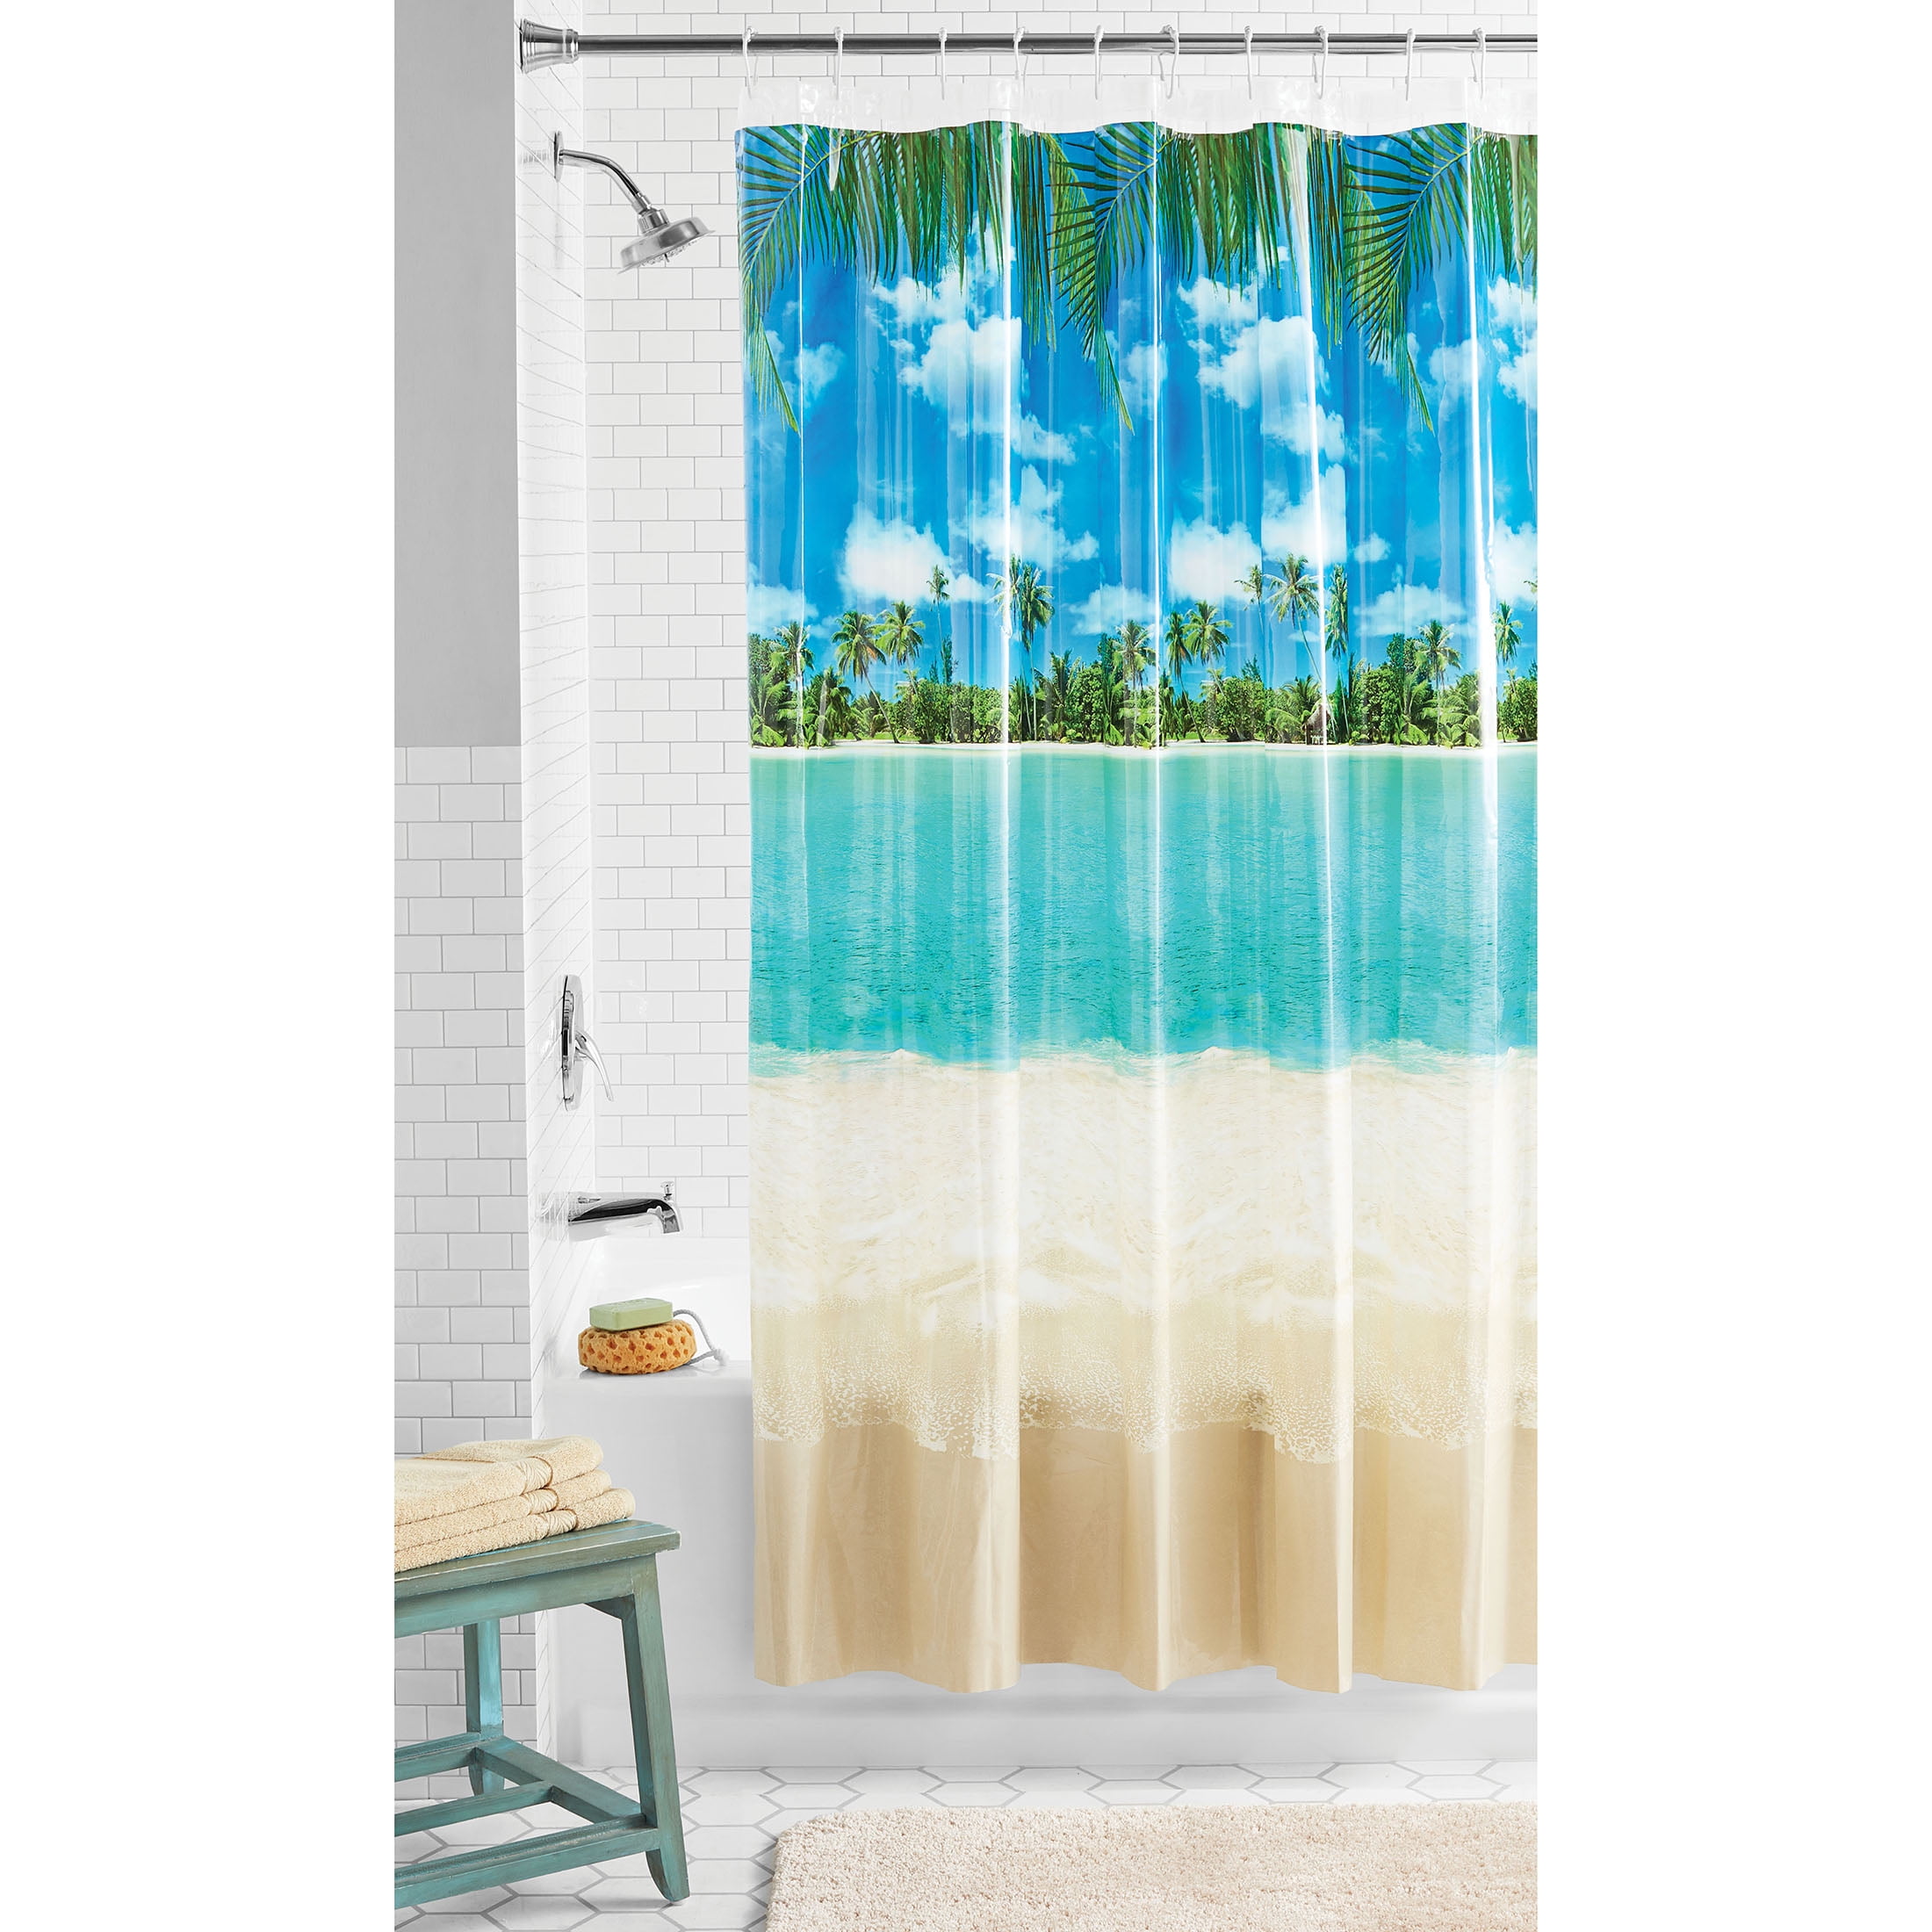 Seascape Sunbeds Balcony White Wooden Windows Shower Curtain Extra Long 84 Inch 